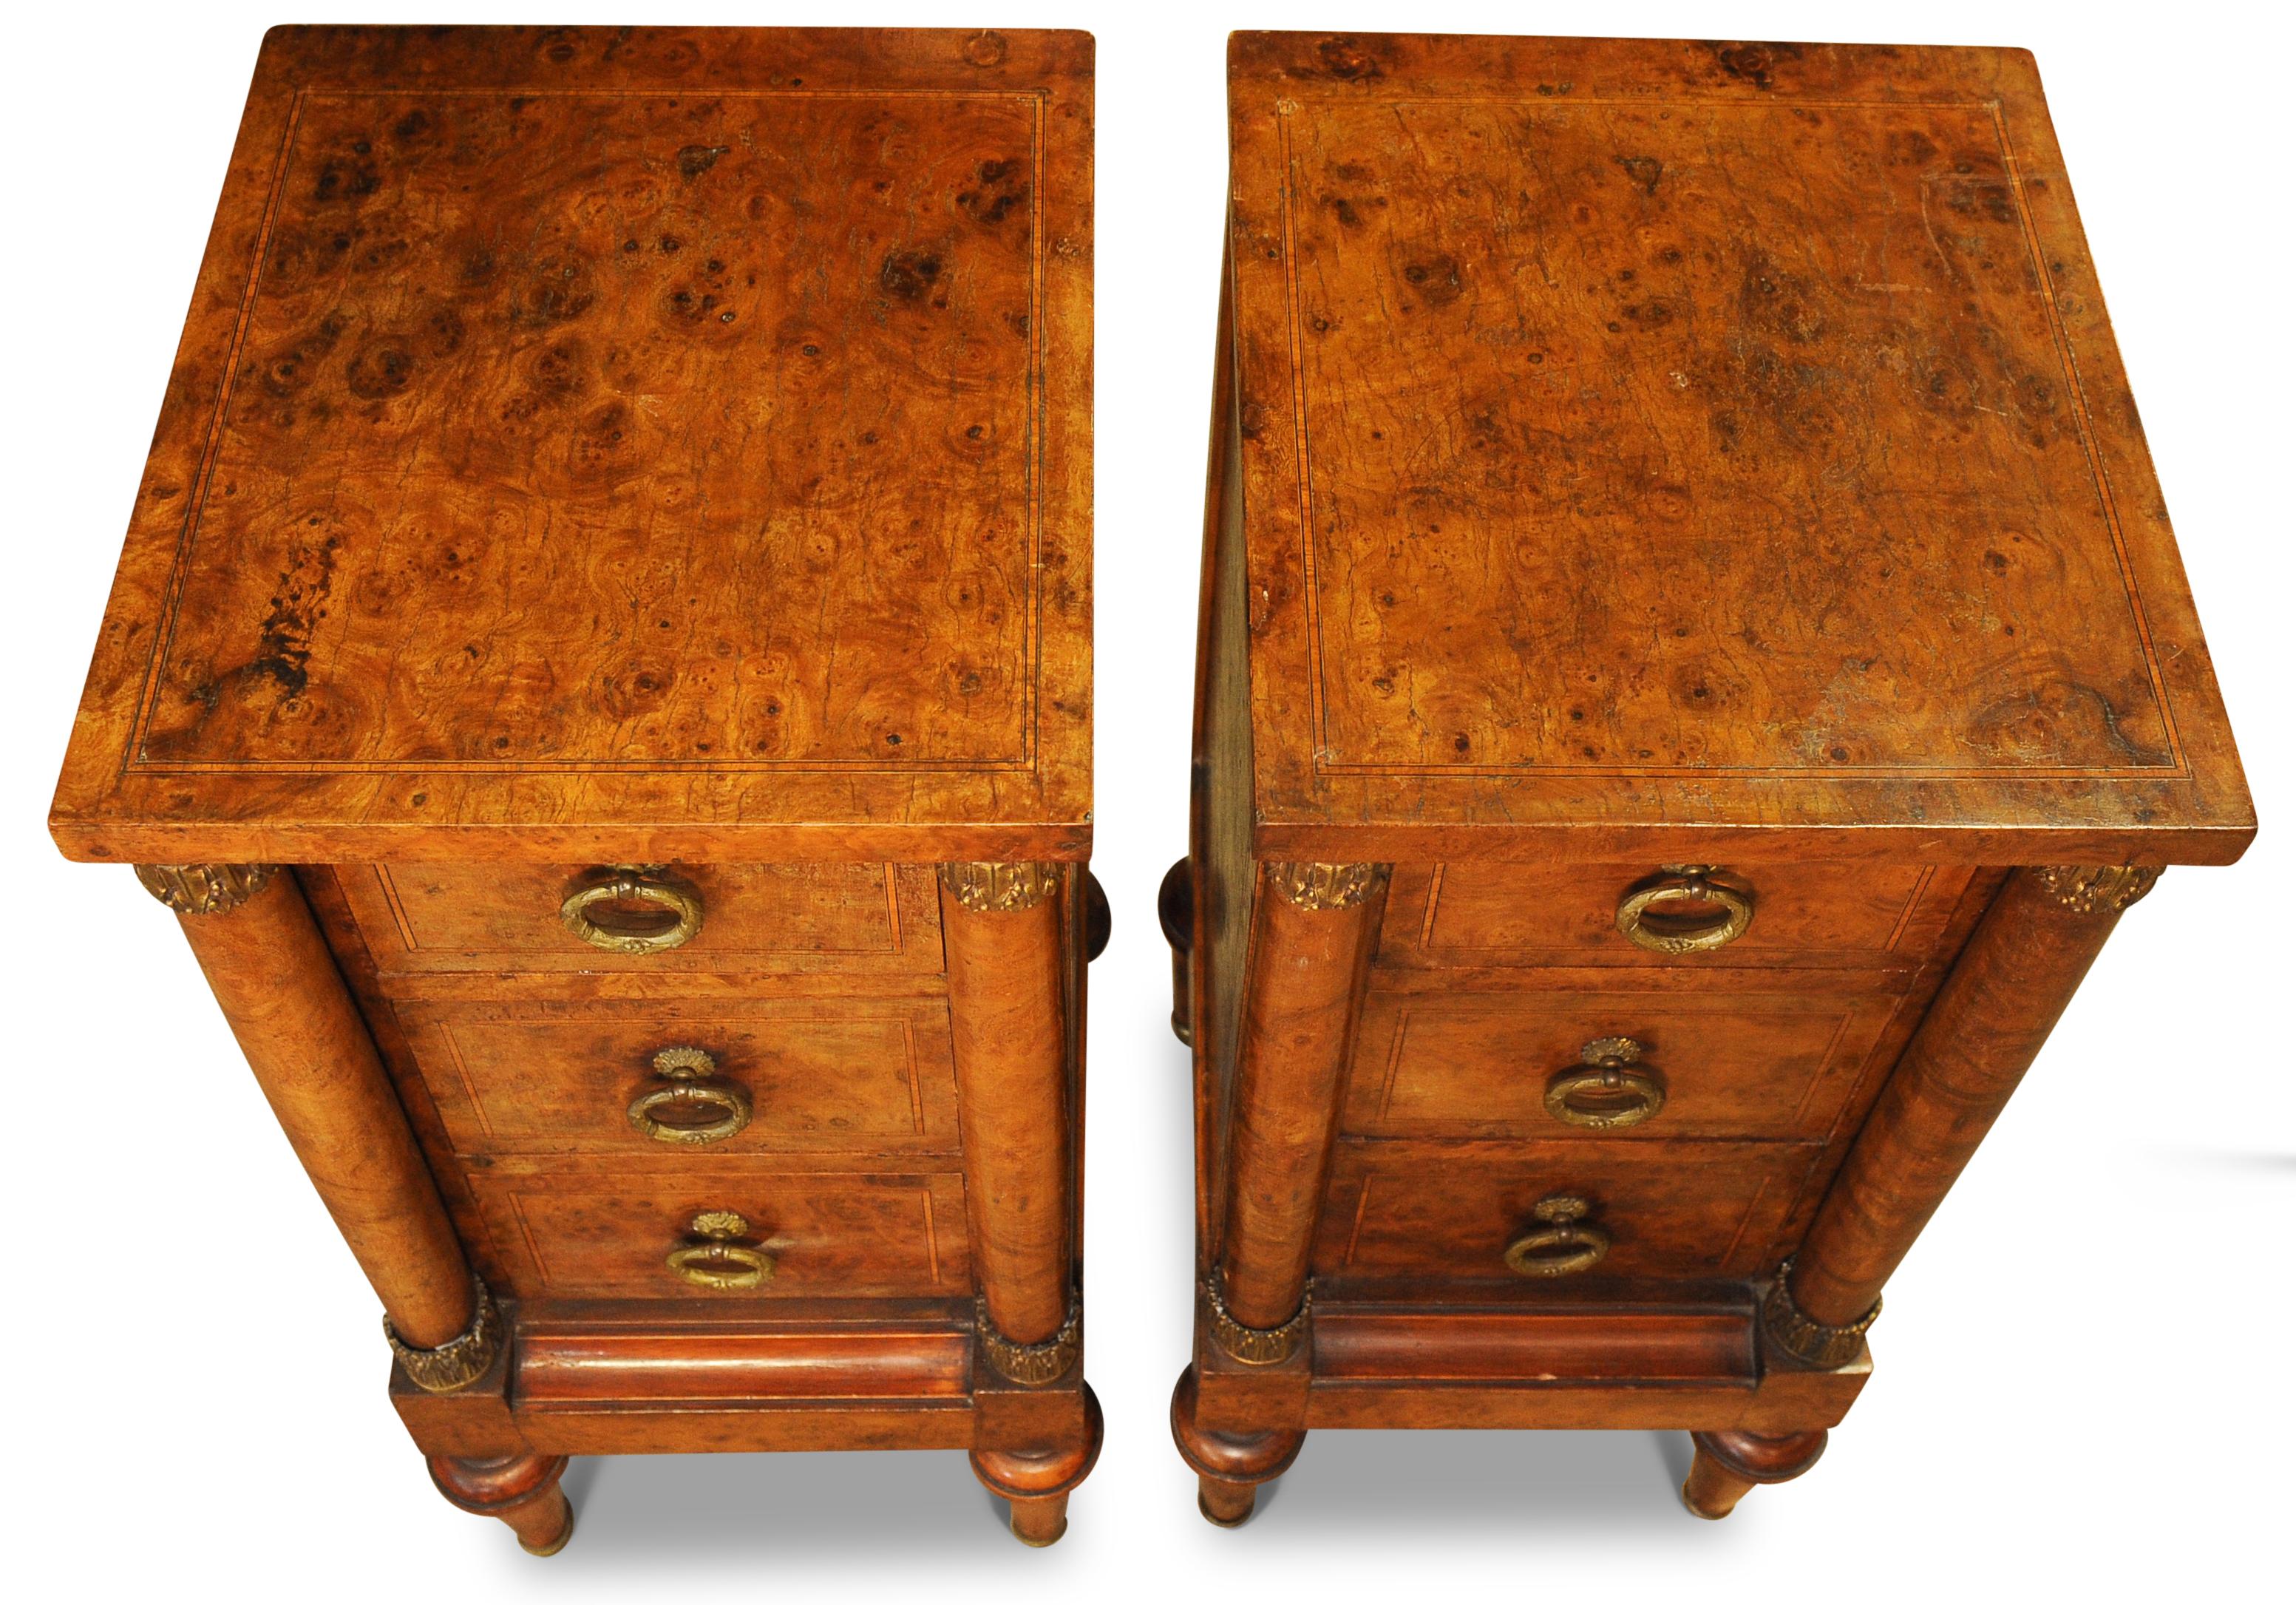 Exquisite Pair of French Empire Design Figured Walnut Three Drawer Nightstands For Sale 5